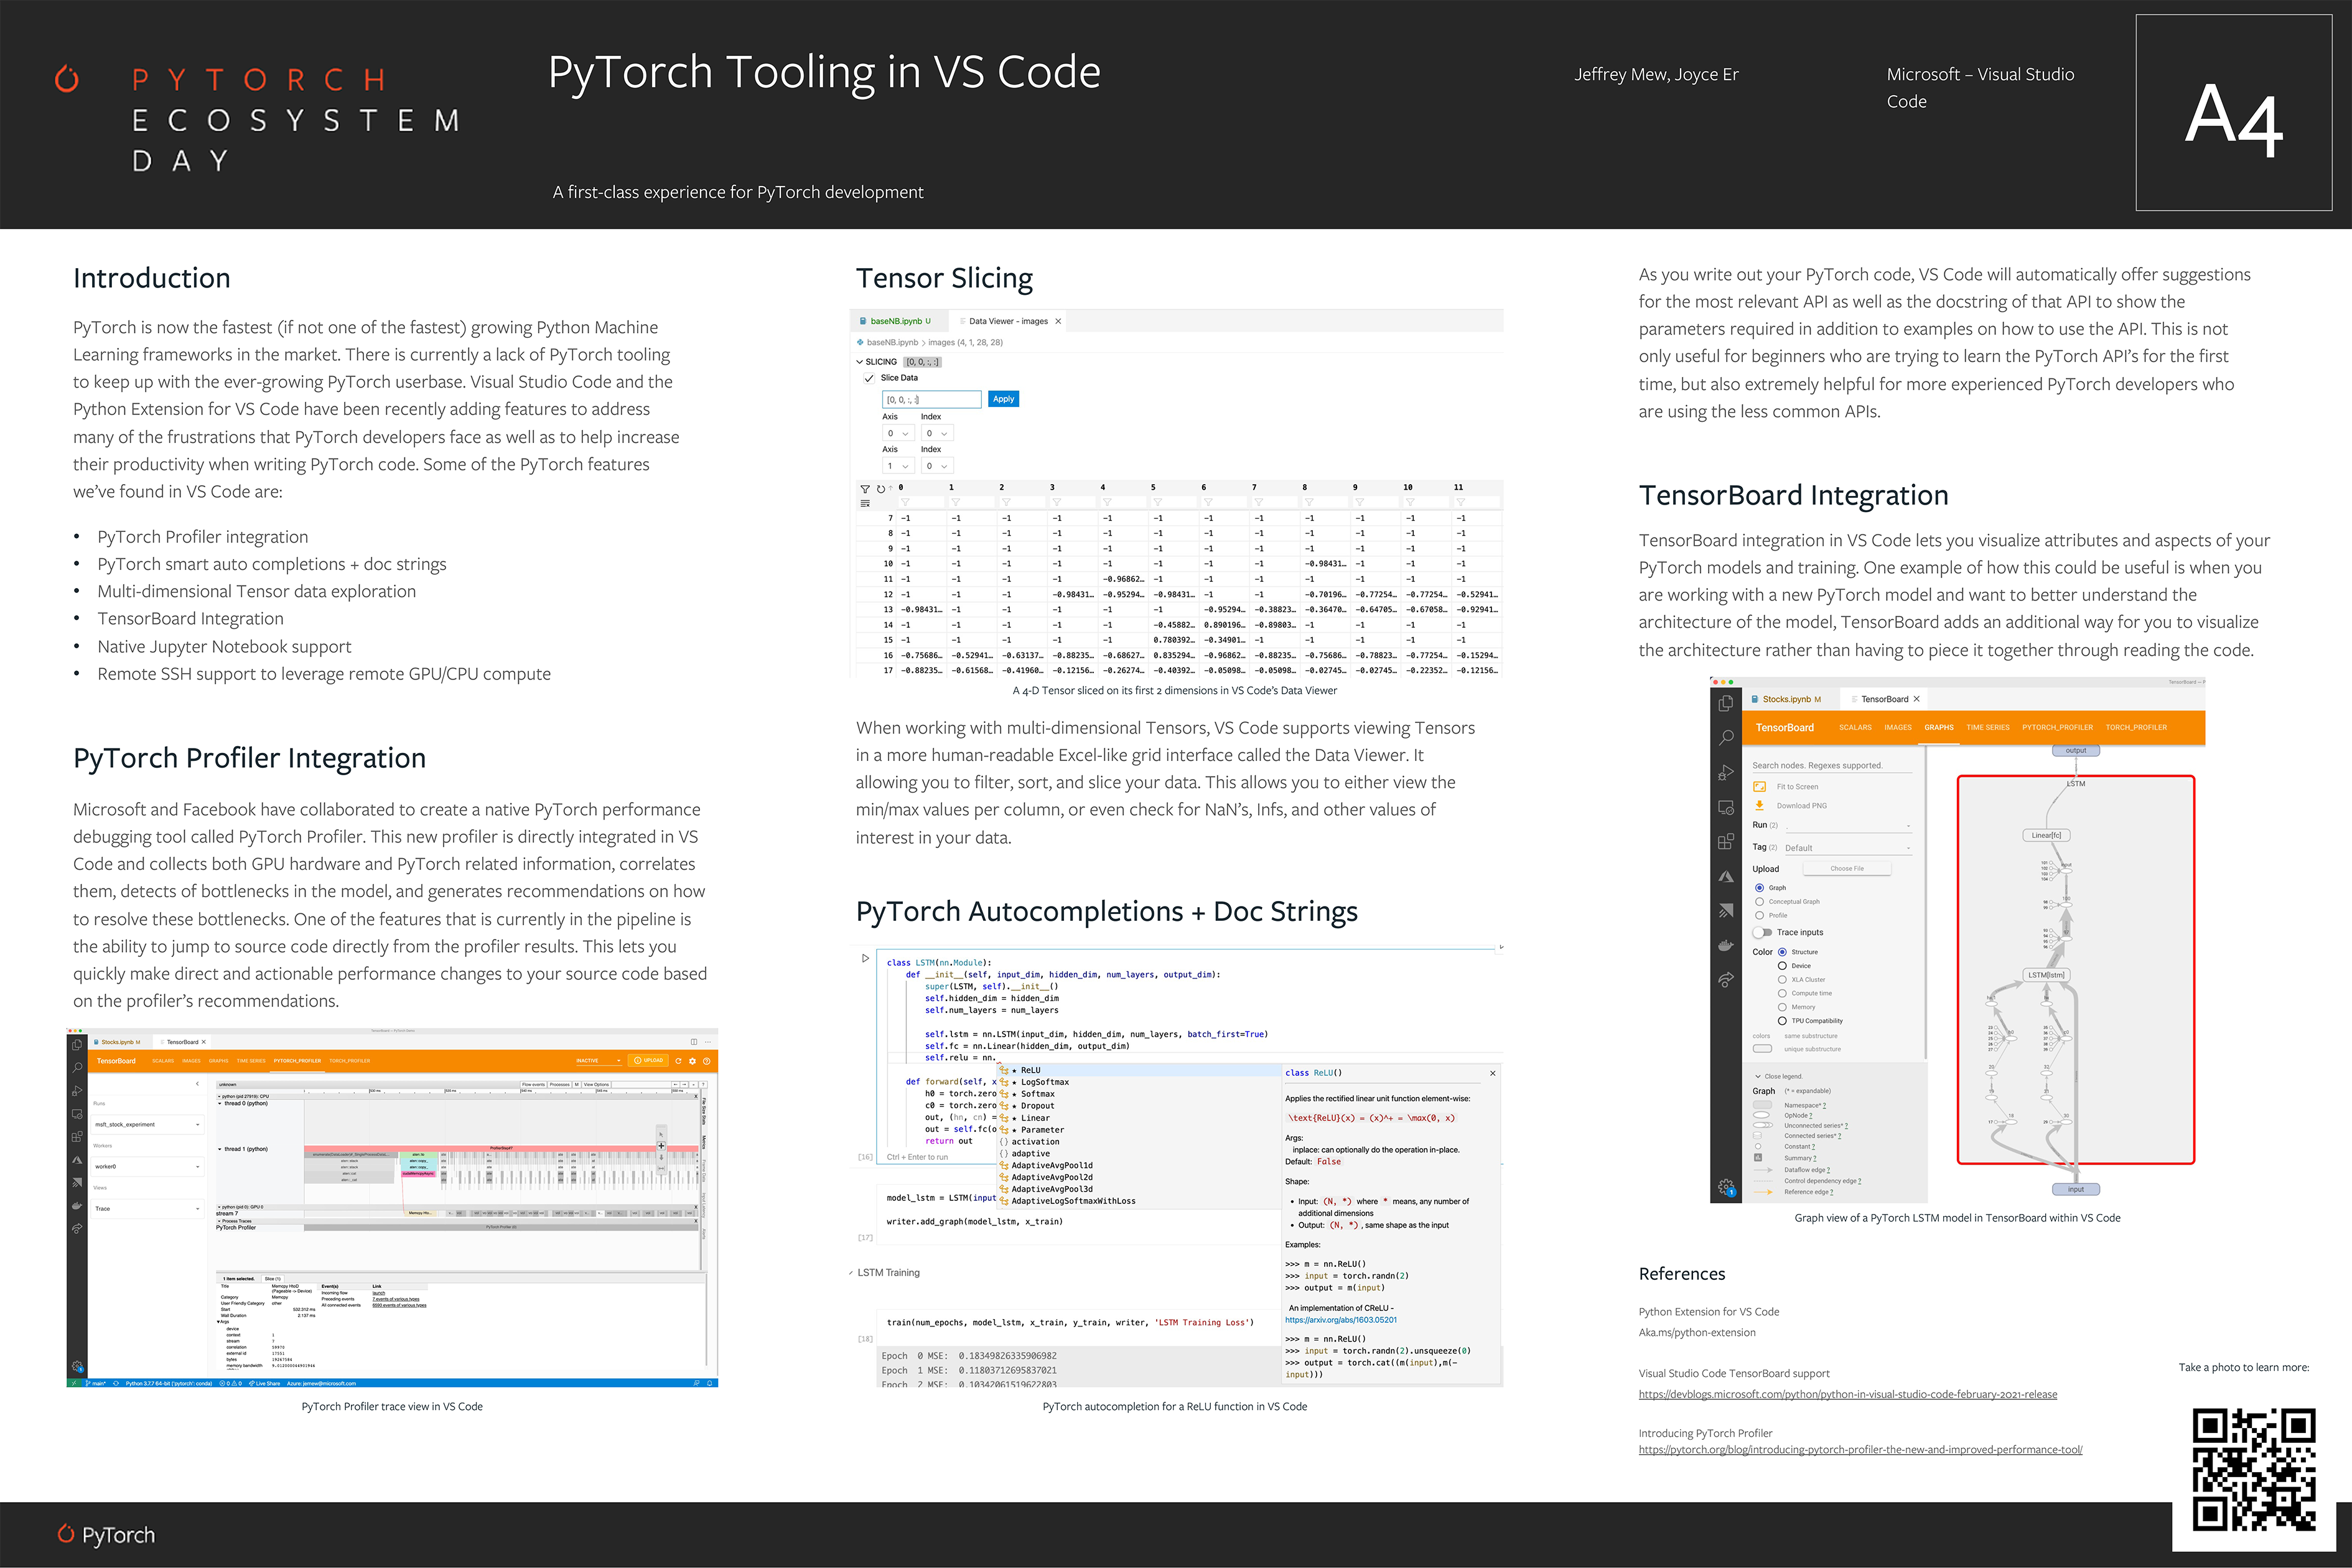 PyTorch Tooling in VS Code (Poster)